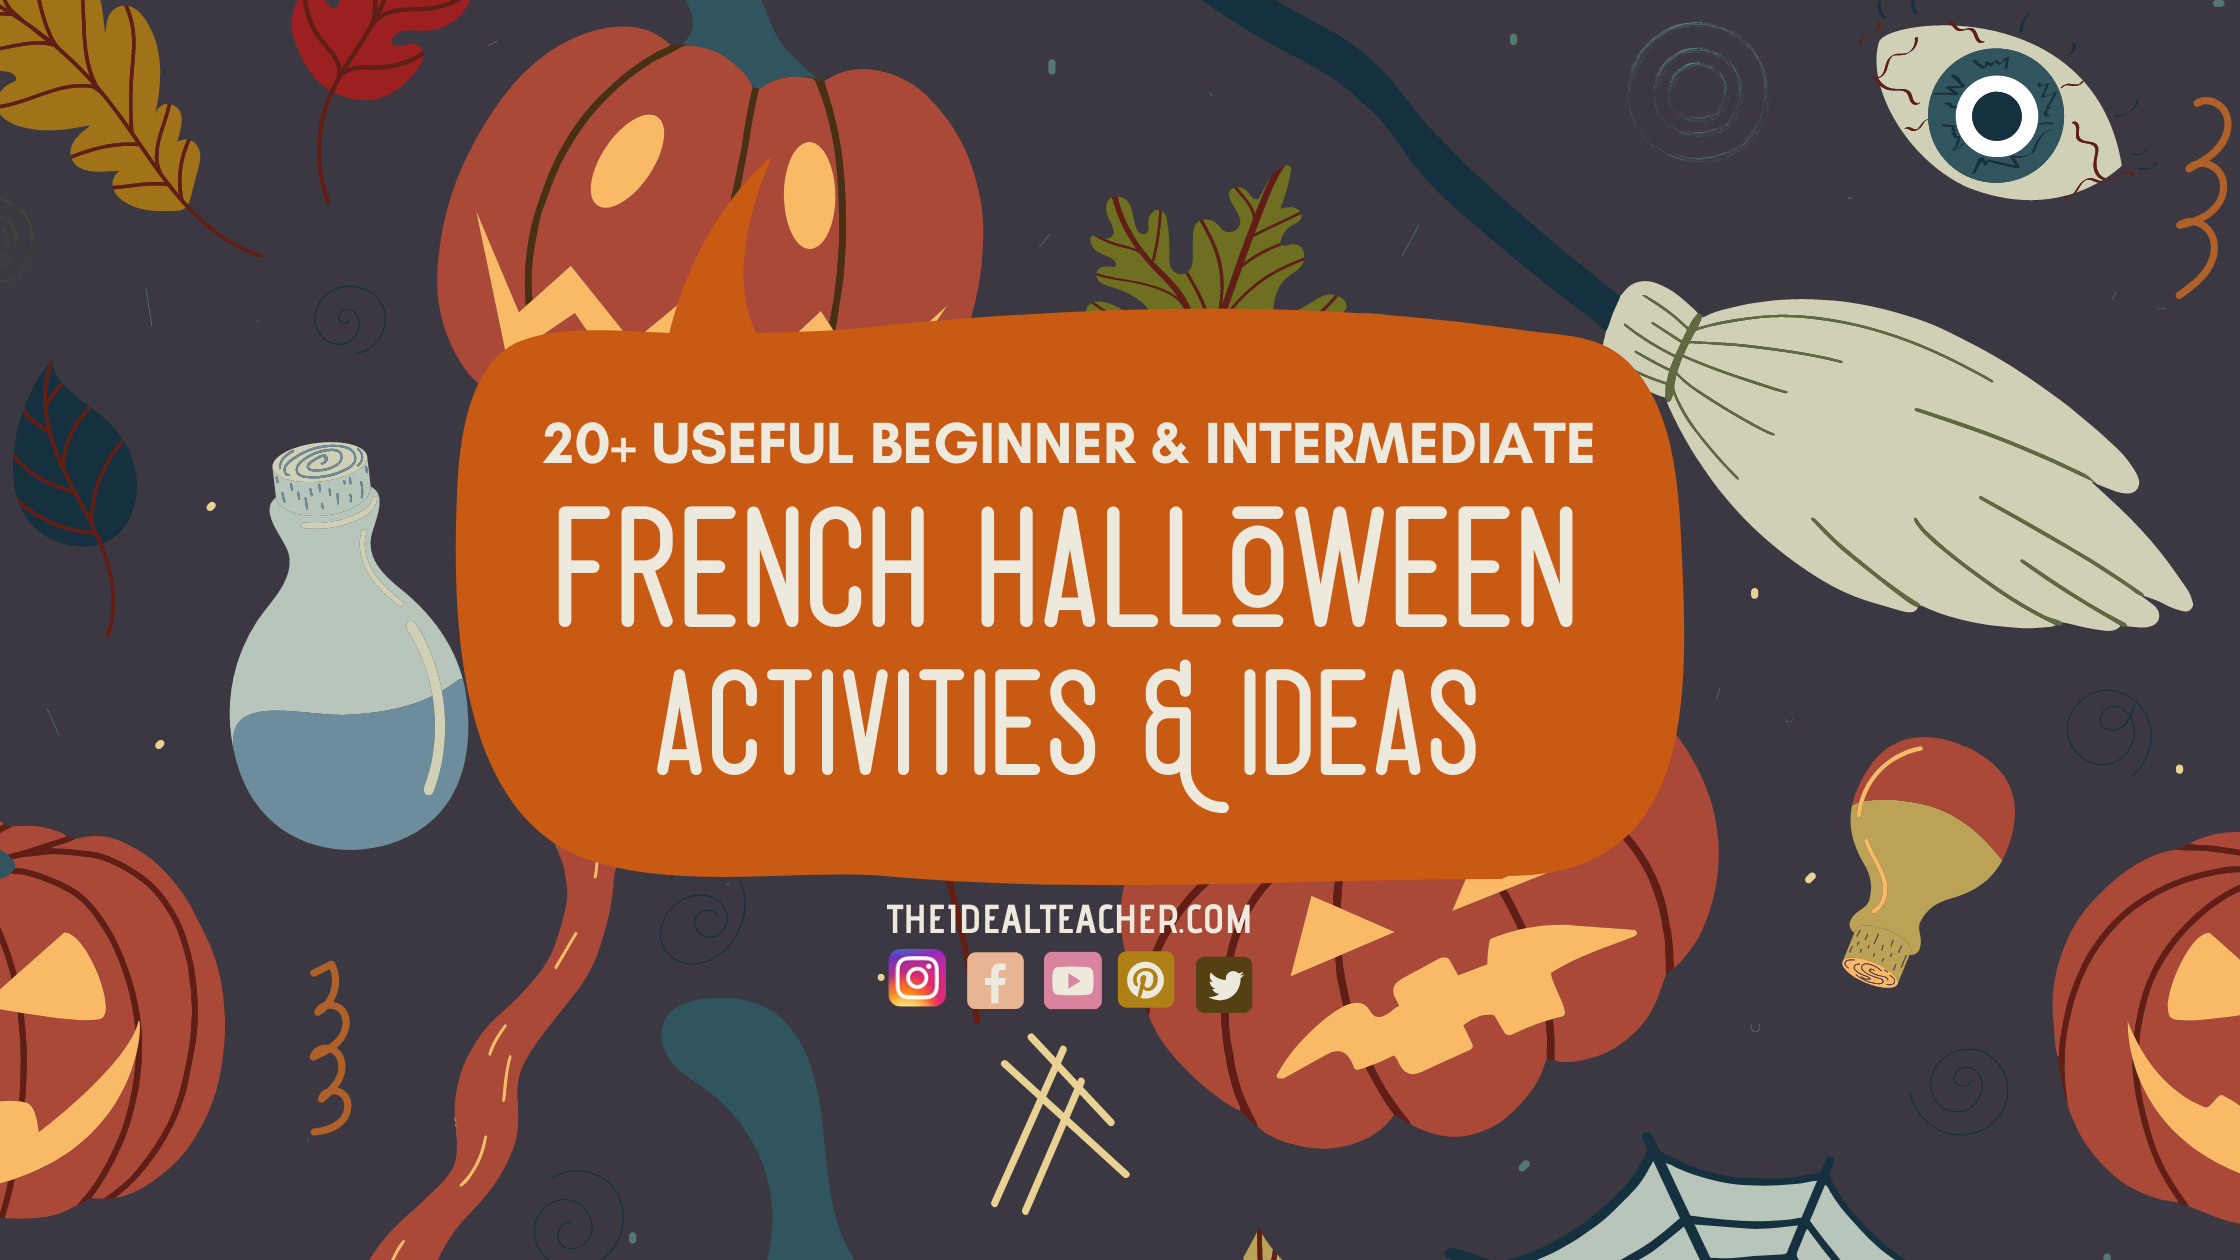 22+ Useful French Halloween Activities for Beginner and Intermediate Lessons